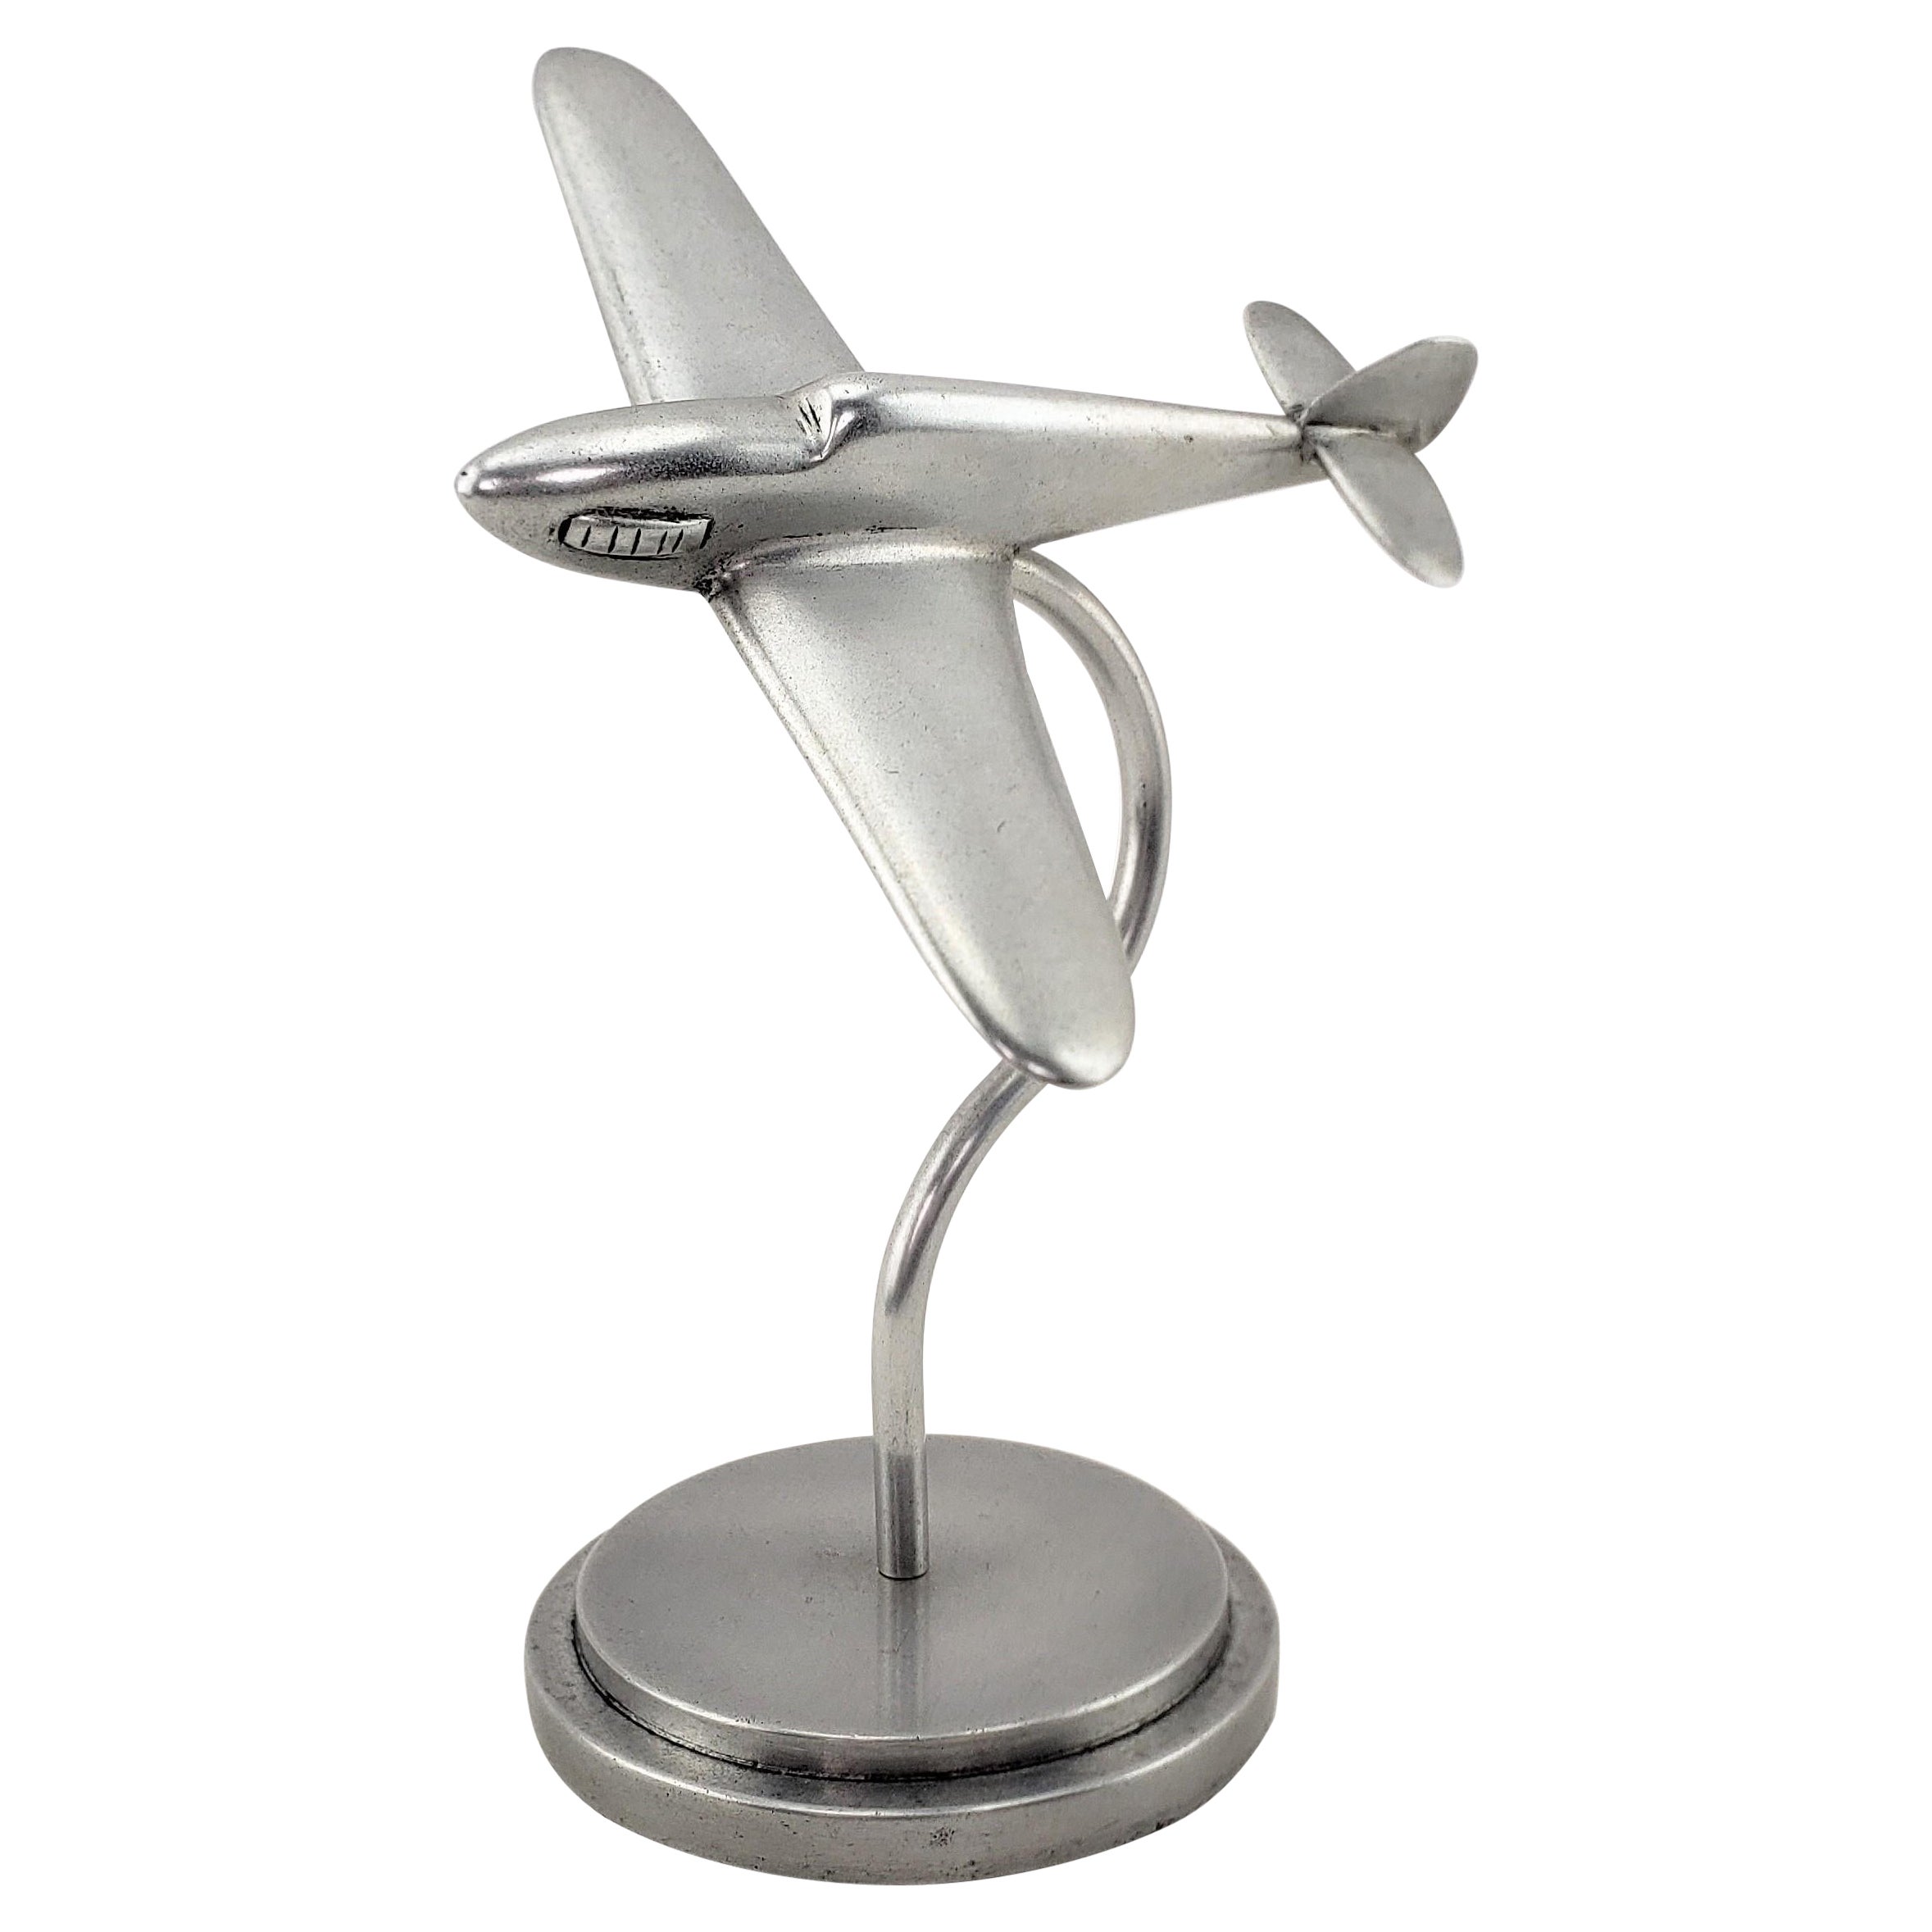 Art Deco Cast Aluminum Stylized Fighter Airplane Model or Sculpture & Stand